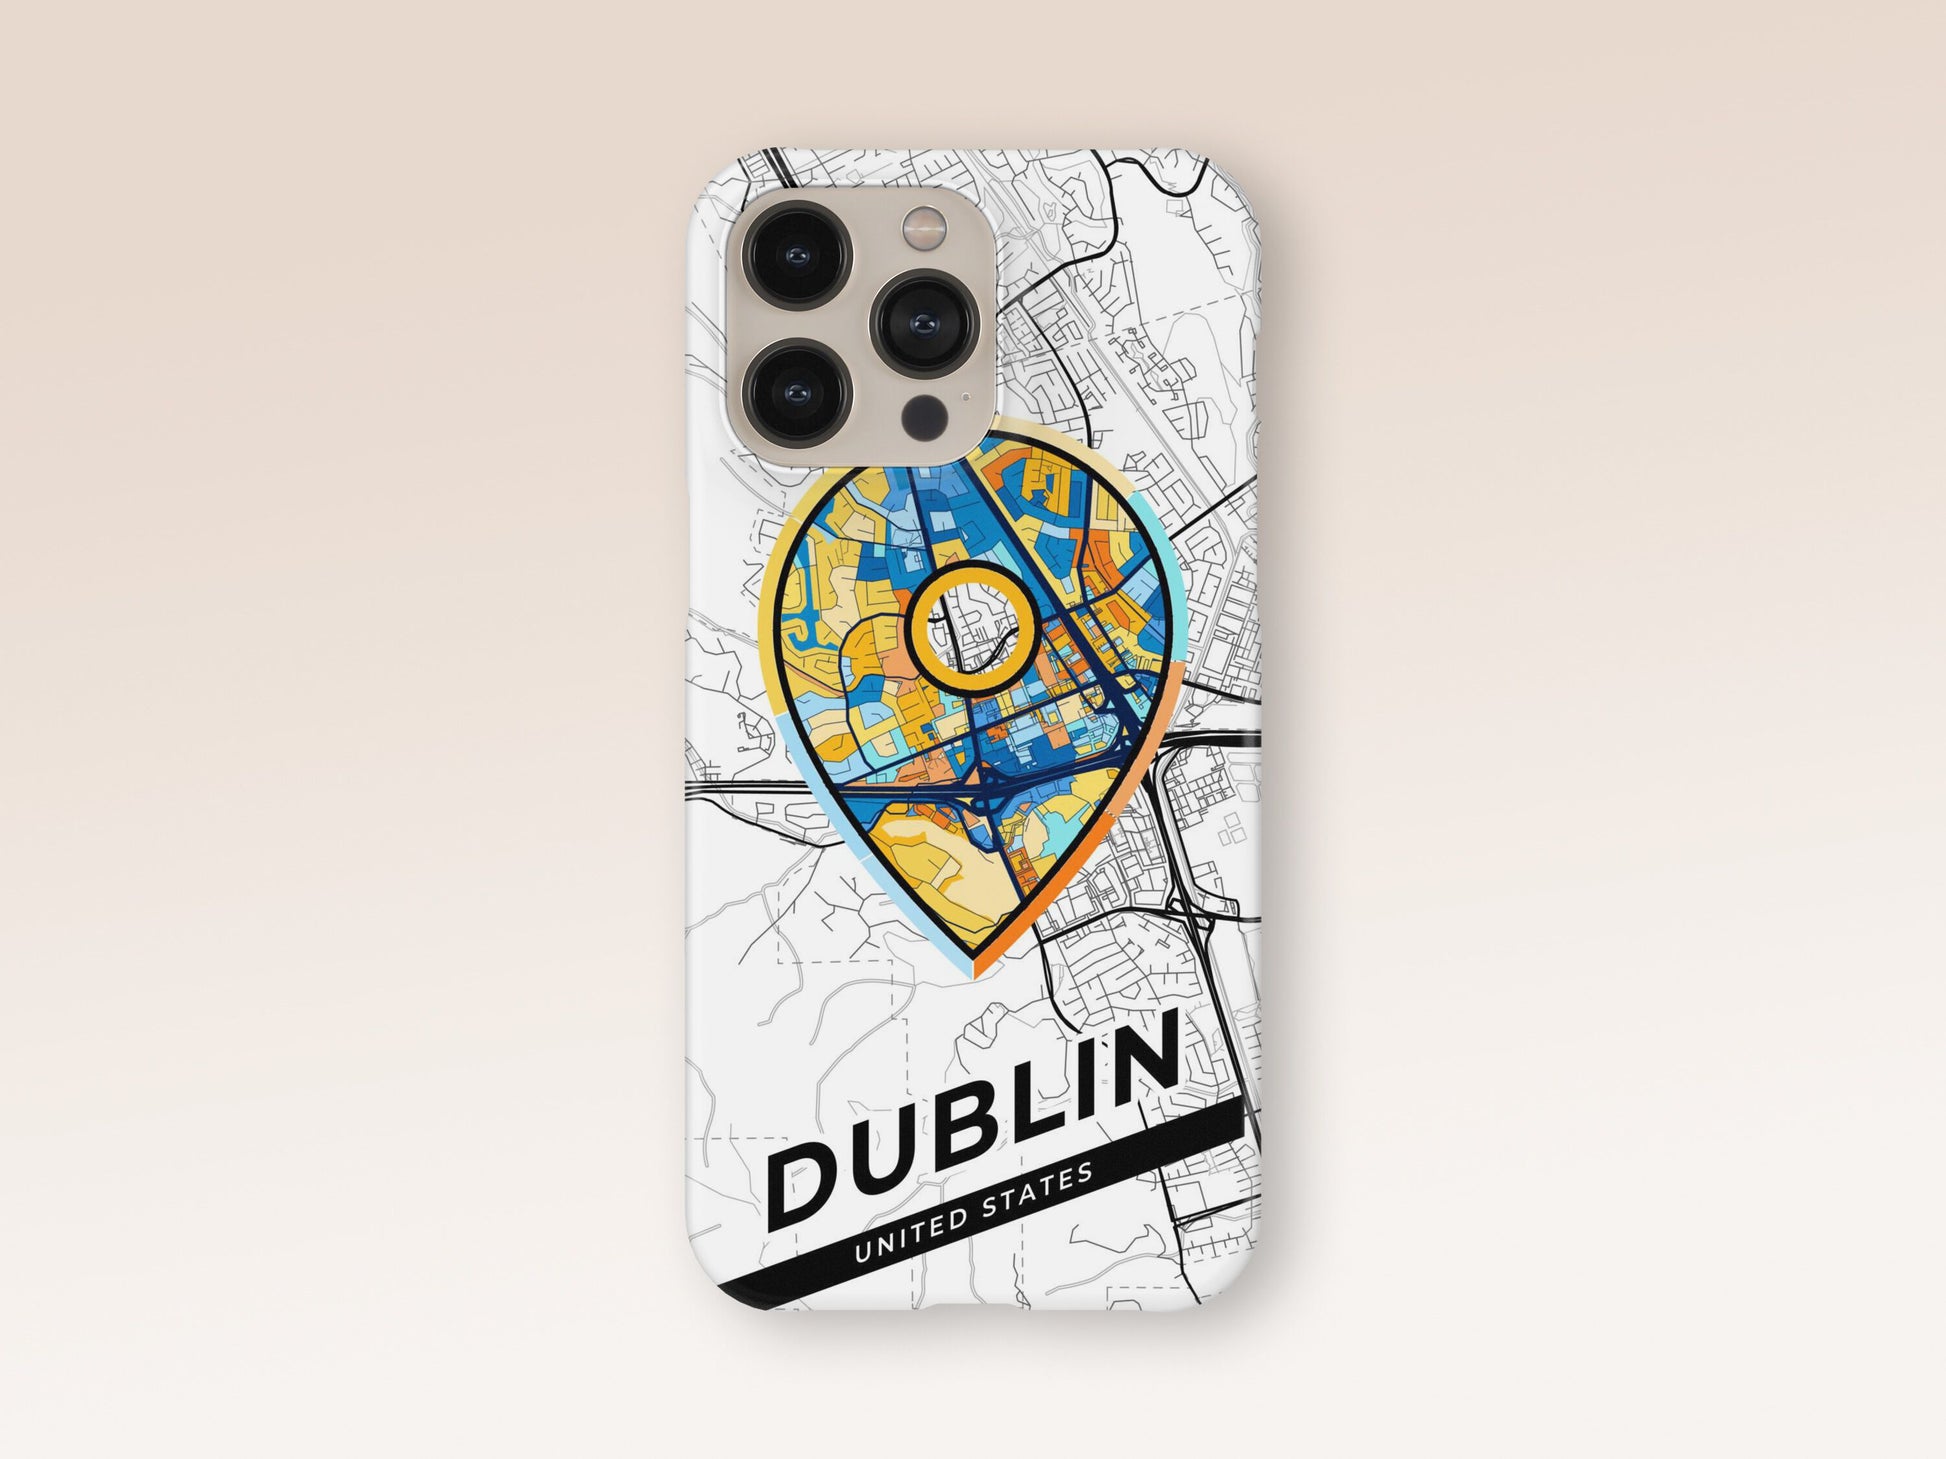 Dublin California slim phone case with colorful icon. Birthday, wedding or housewarming gift. Couple match cases. 1